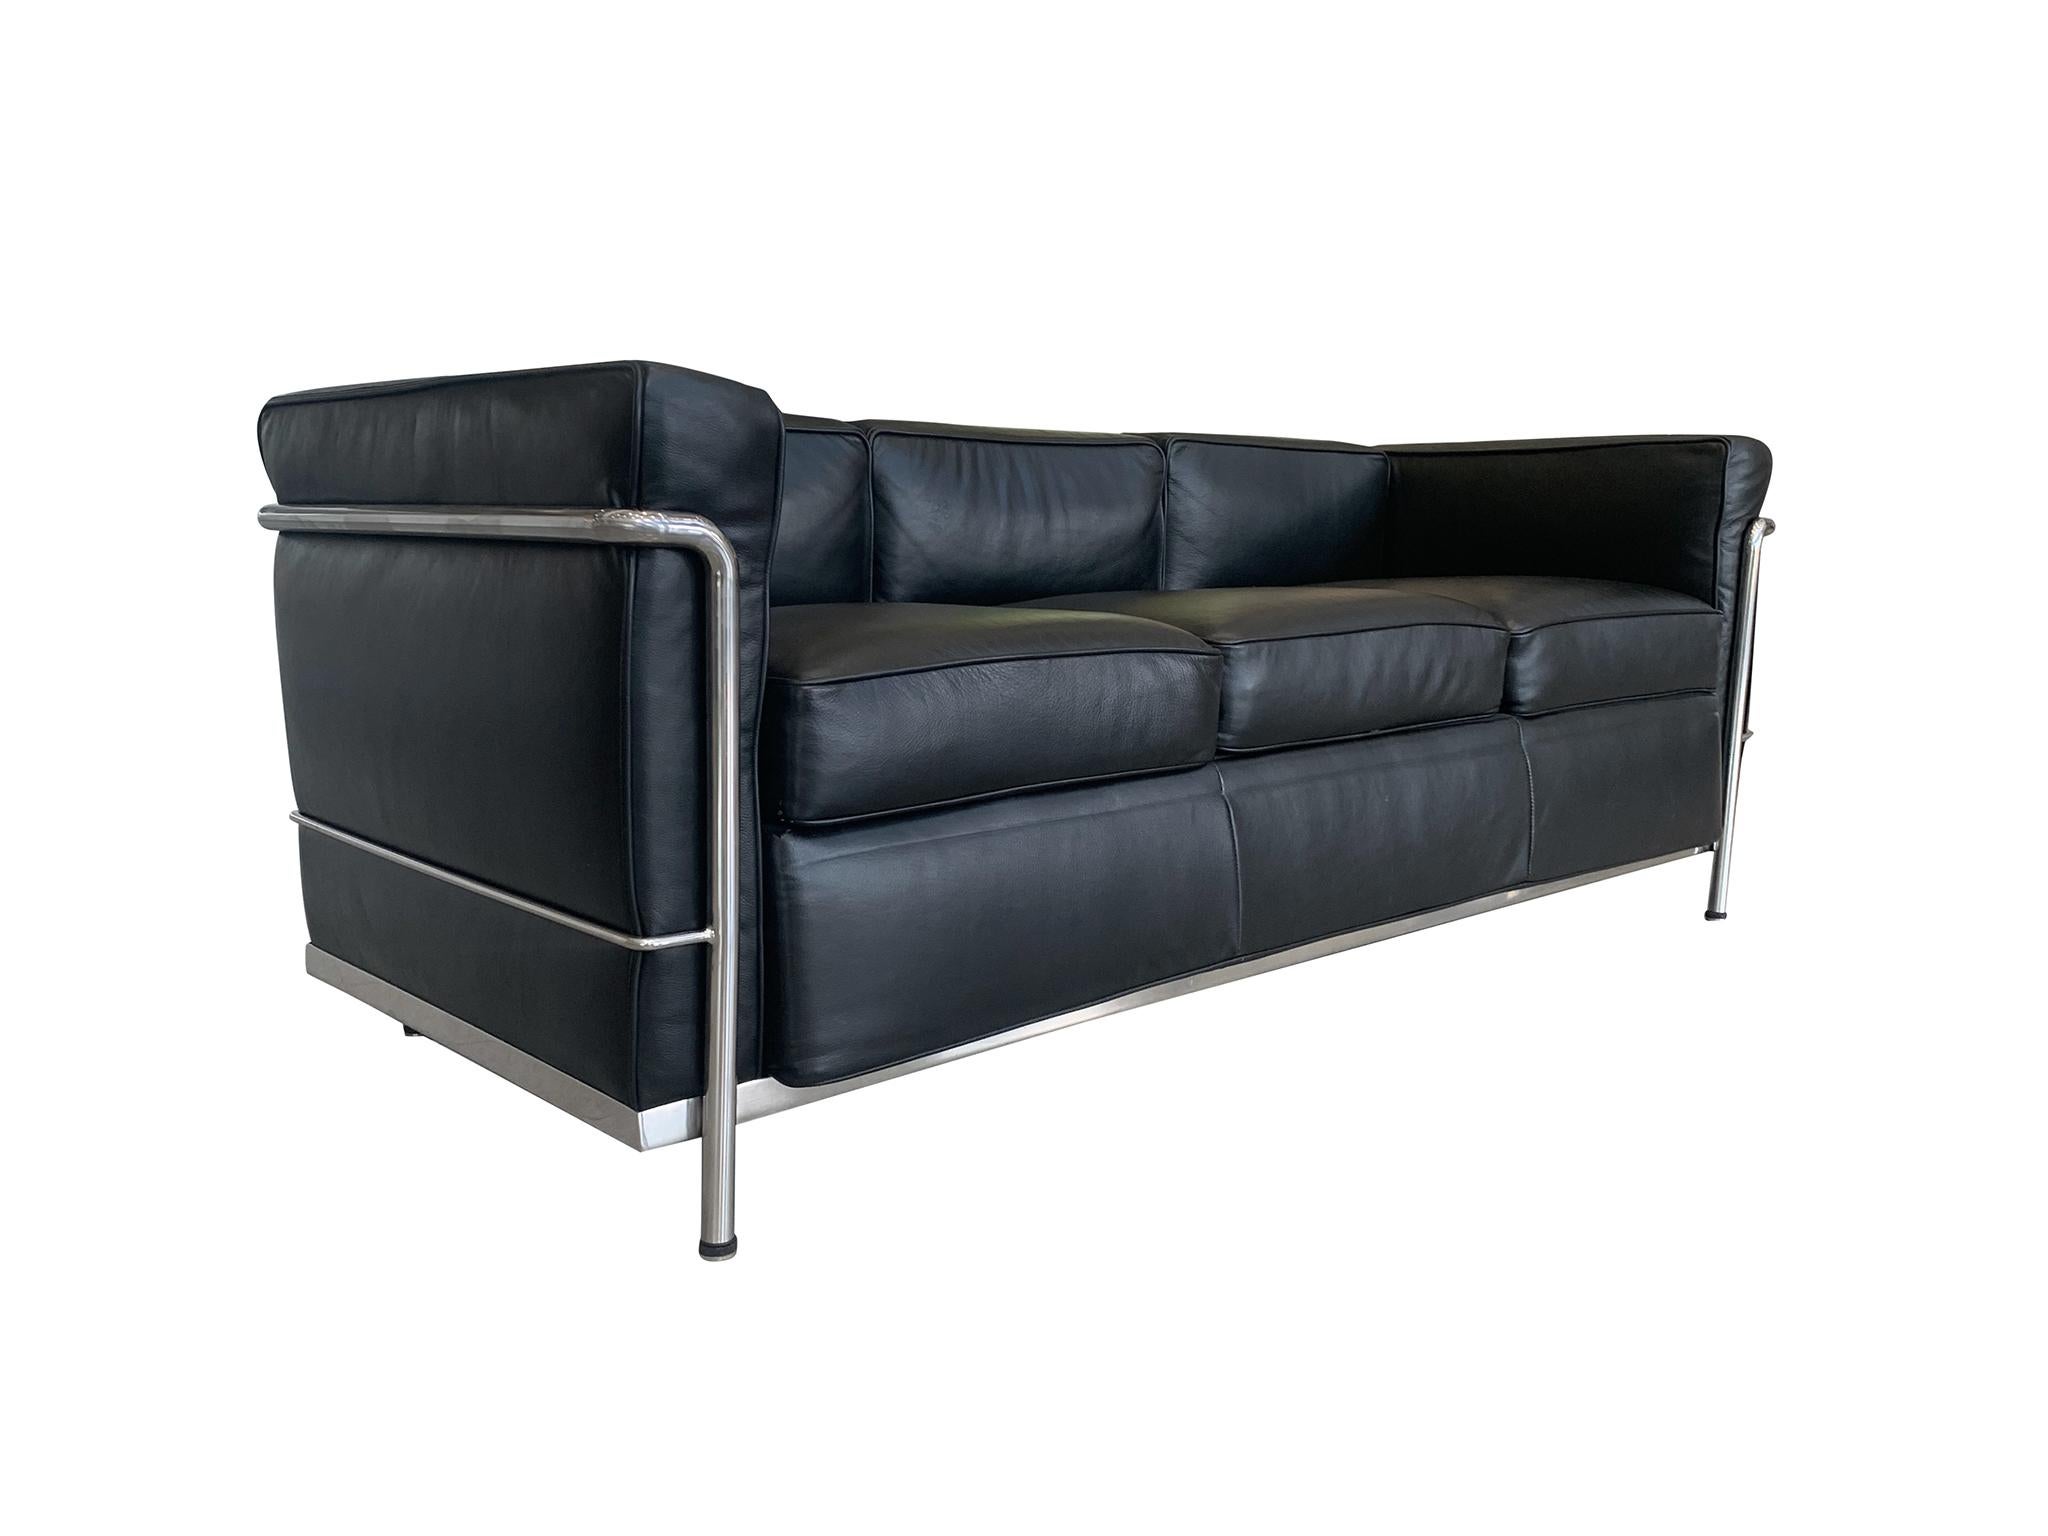 Black leather & chrome three-seater sofa, manufactured in the Late 20th Century. The sofa takes after the LC3 sofa designed by Le Corbusier, Pierre Jeanneret, and Charlotte Perriand. It consists of leather-upholstered cushions, tubular chrome frame,